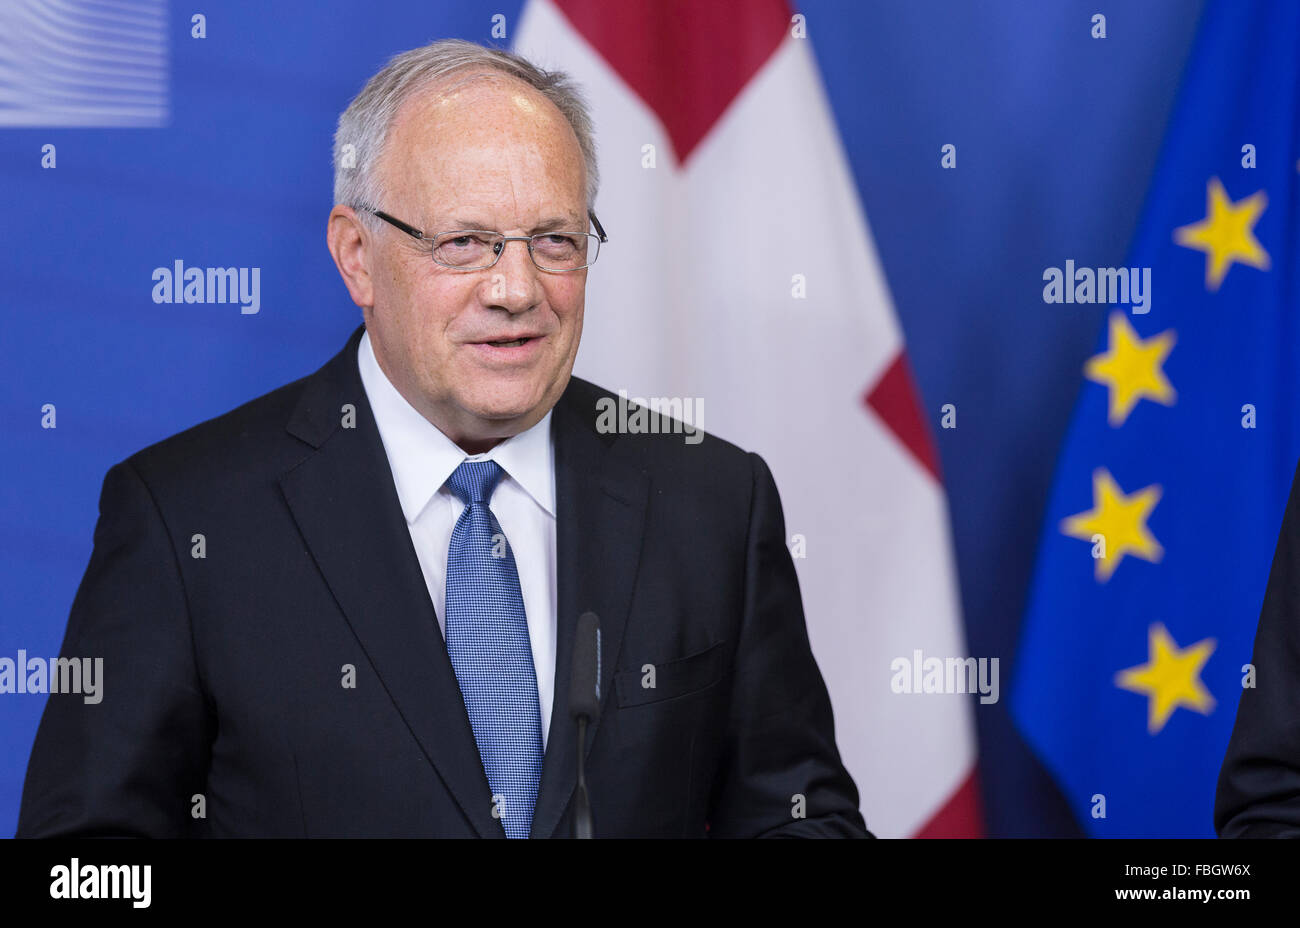 Brussels, Belgium, January 15, 2016. -- President of the Swiss Confederation Johann Schneider-Ammann and European Commission President (Not pictured) speak at a joint news conference before their meeting at the European Commission headquarter. Foto: Thierry Monasse - NO WIRE SERVICE - Stock Photo